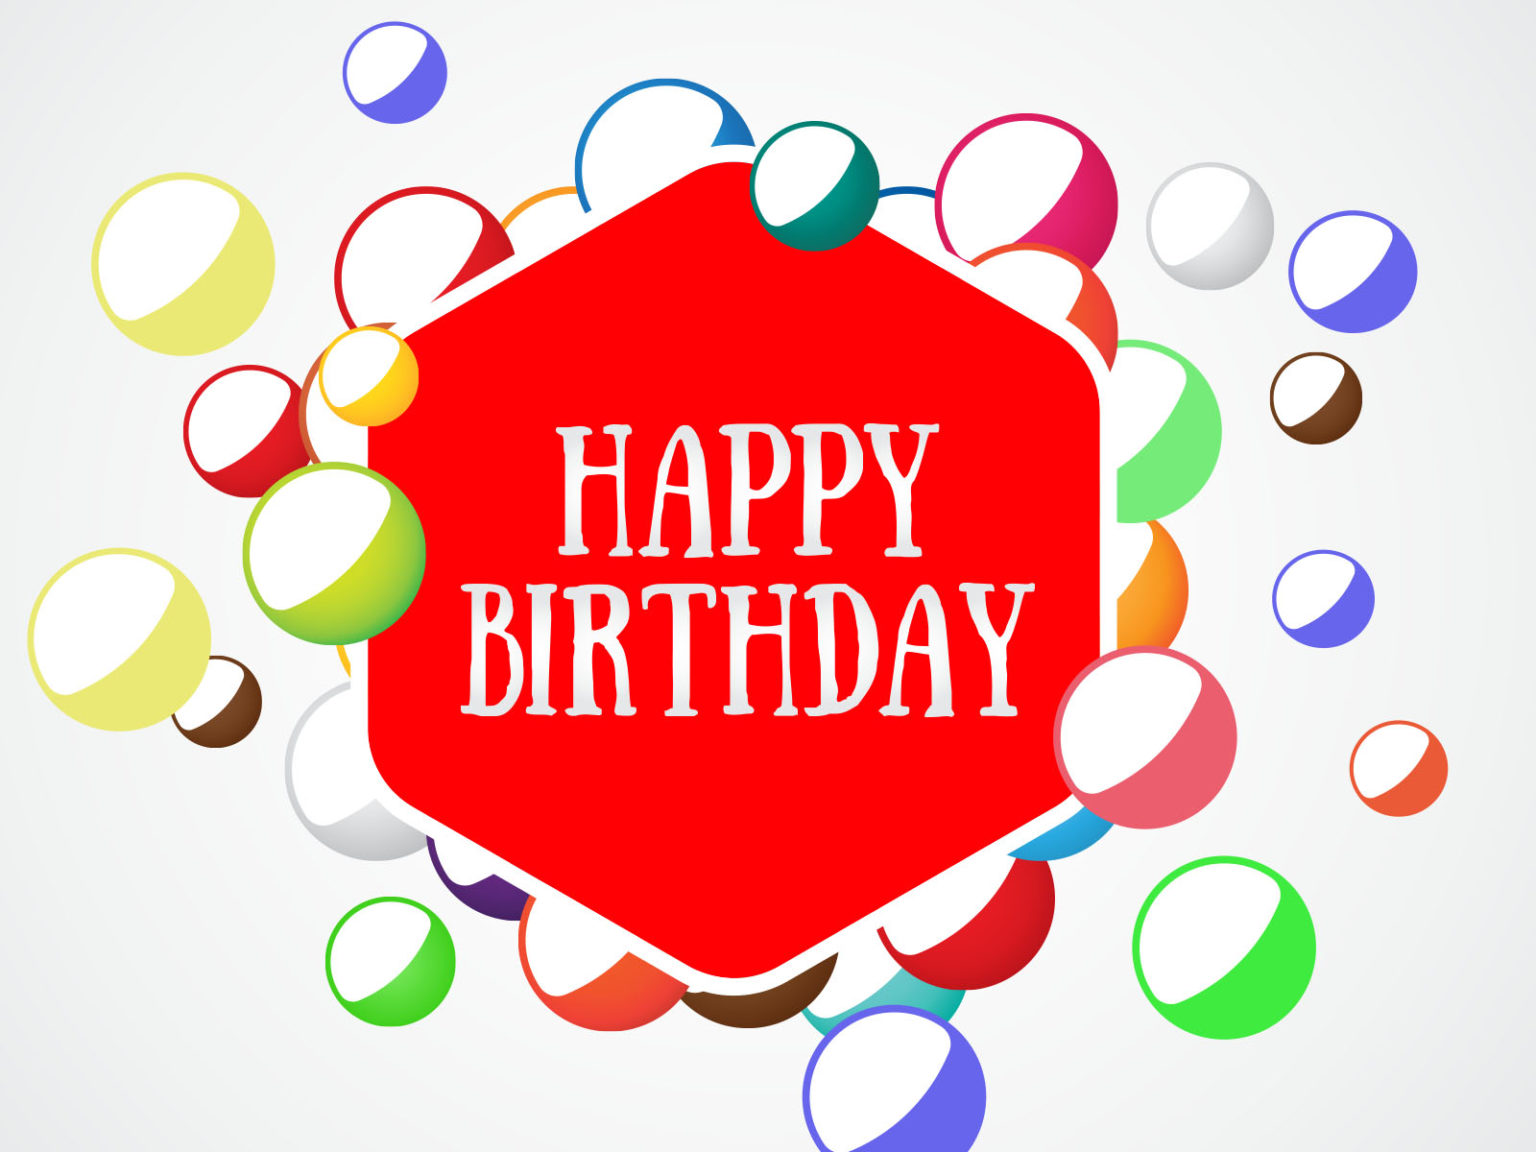 Happy Birthday Backgrounds Celebrations Templates Free PPT Grounds